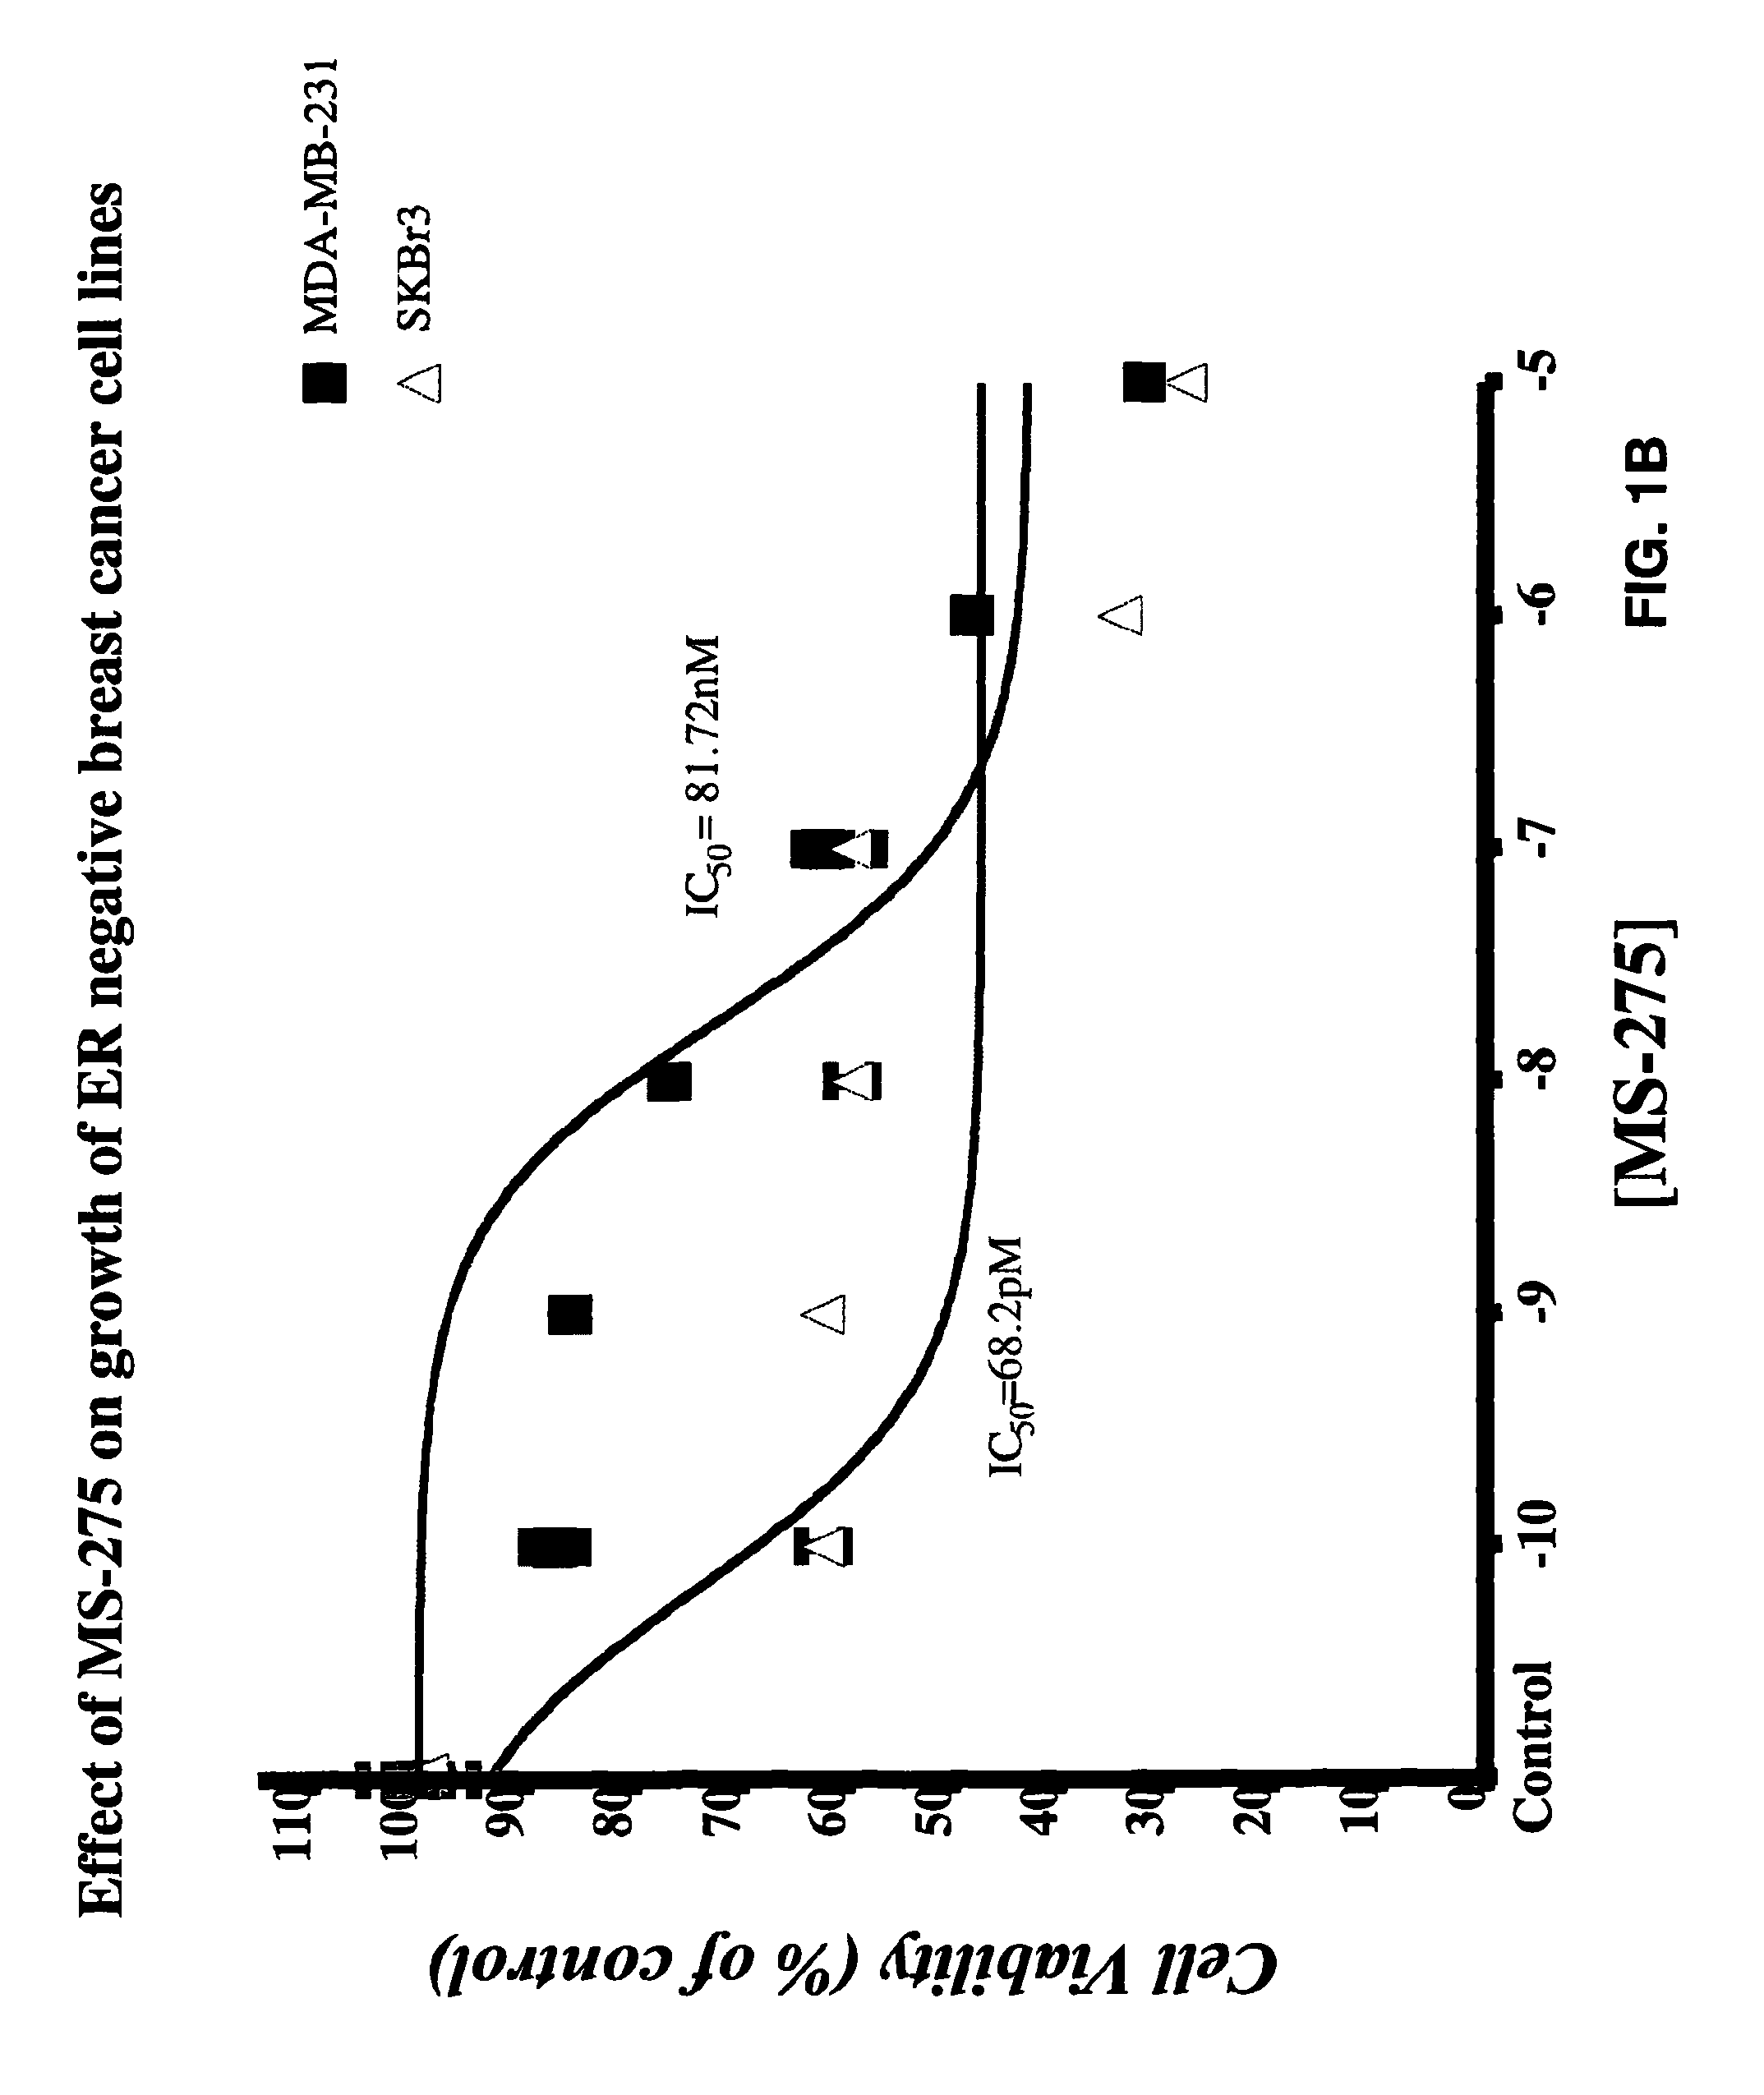 HDAC inhibitors and hormone targeted drugs for the treatment of cancer